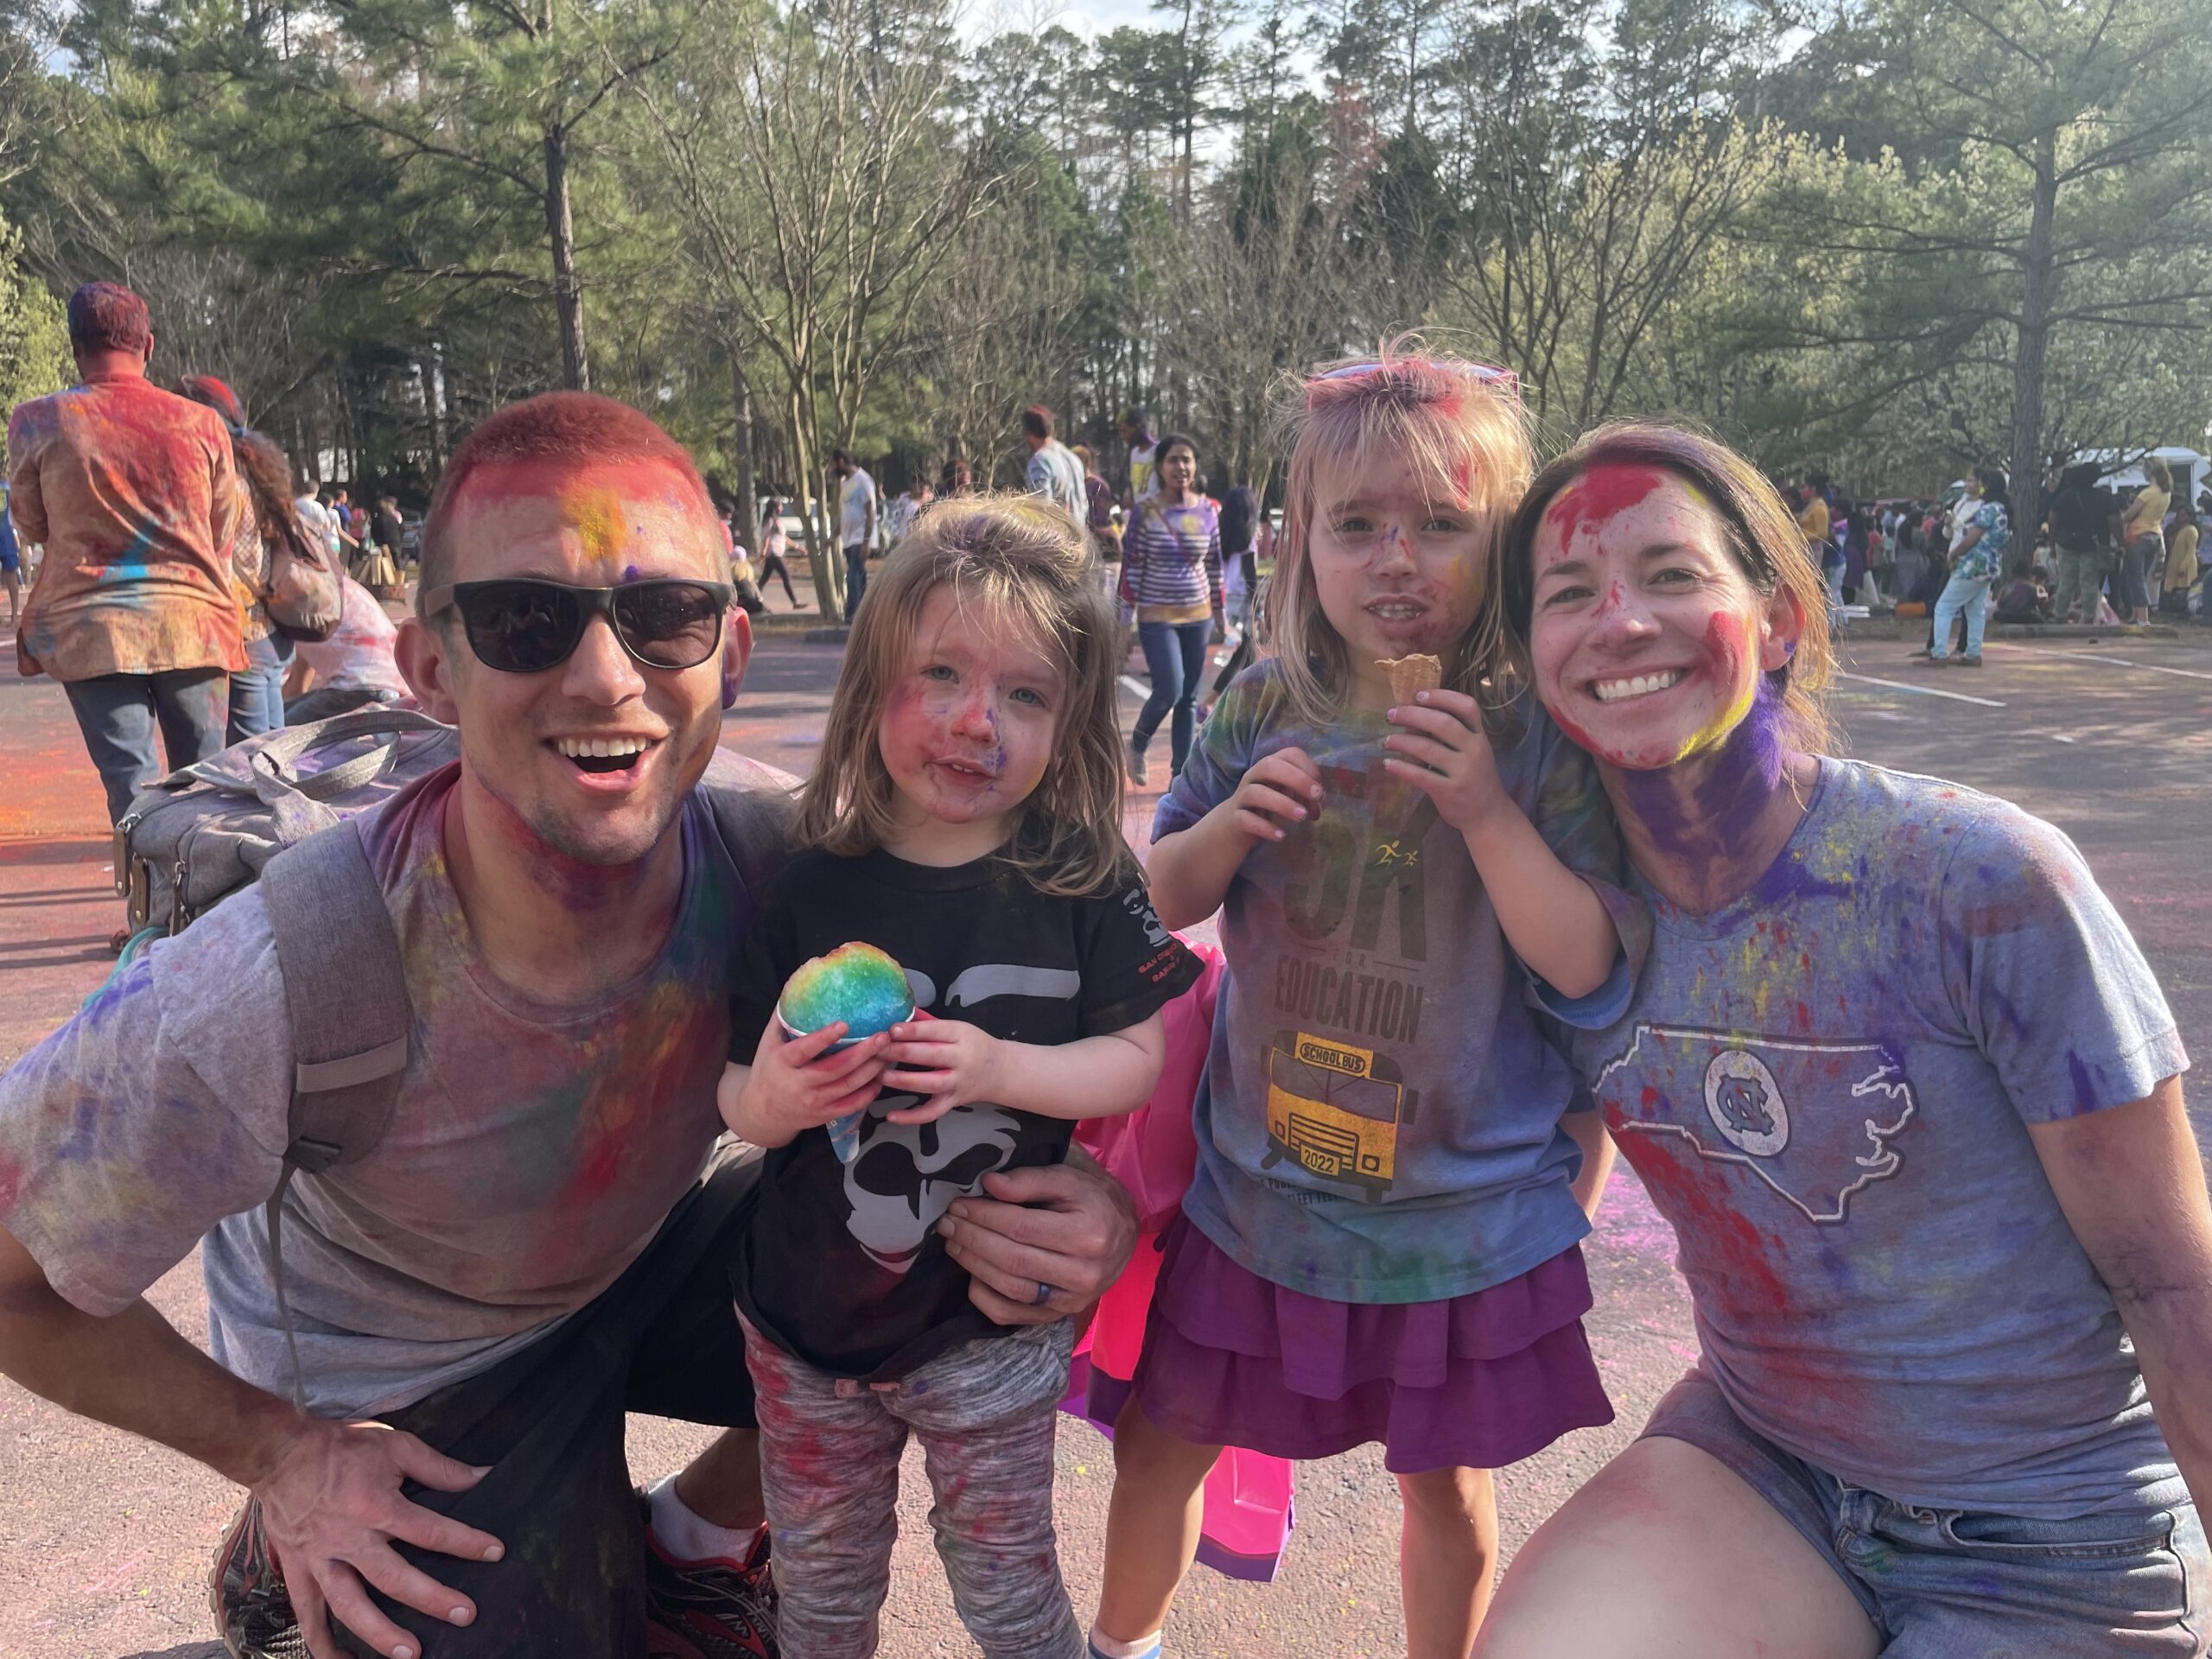 Paul Zimmerman participating in a Holi festival with his family.